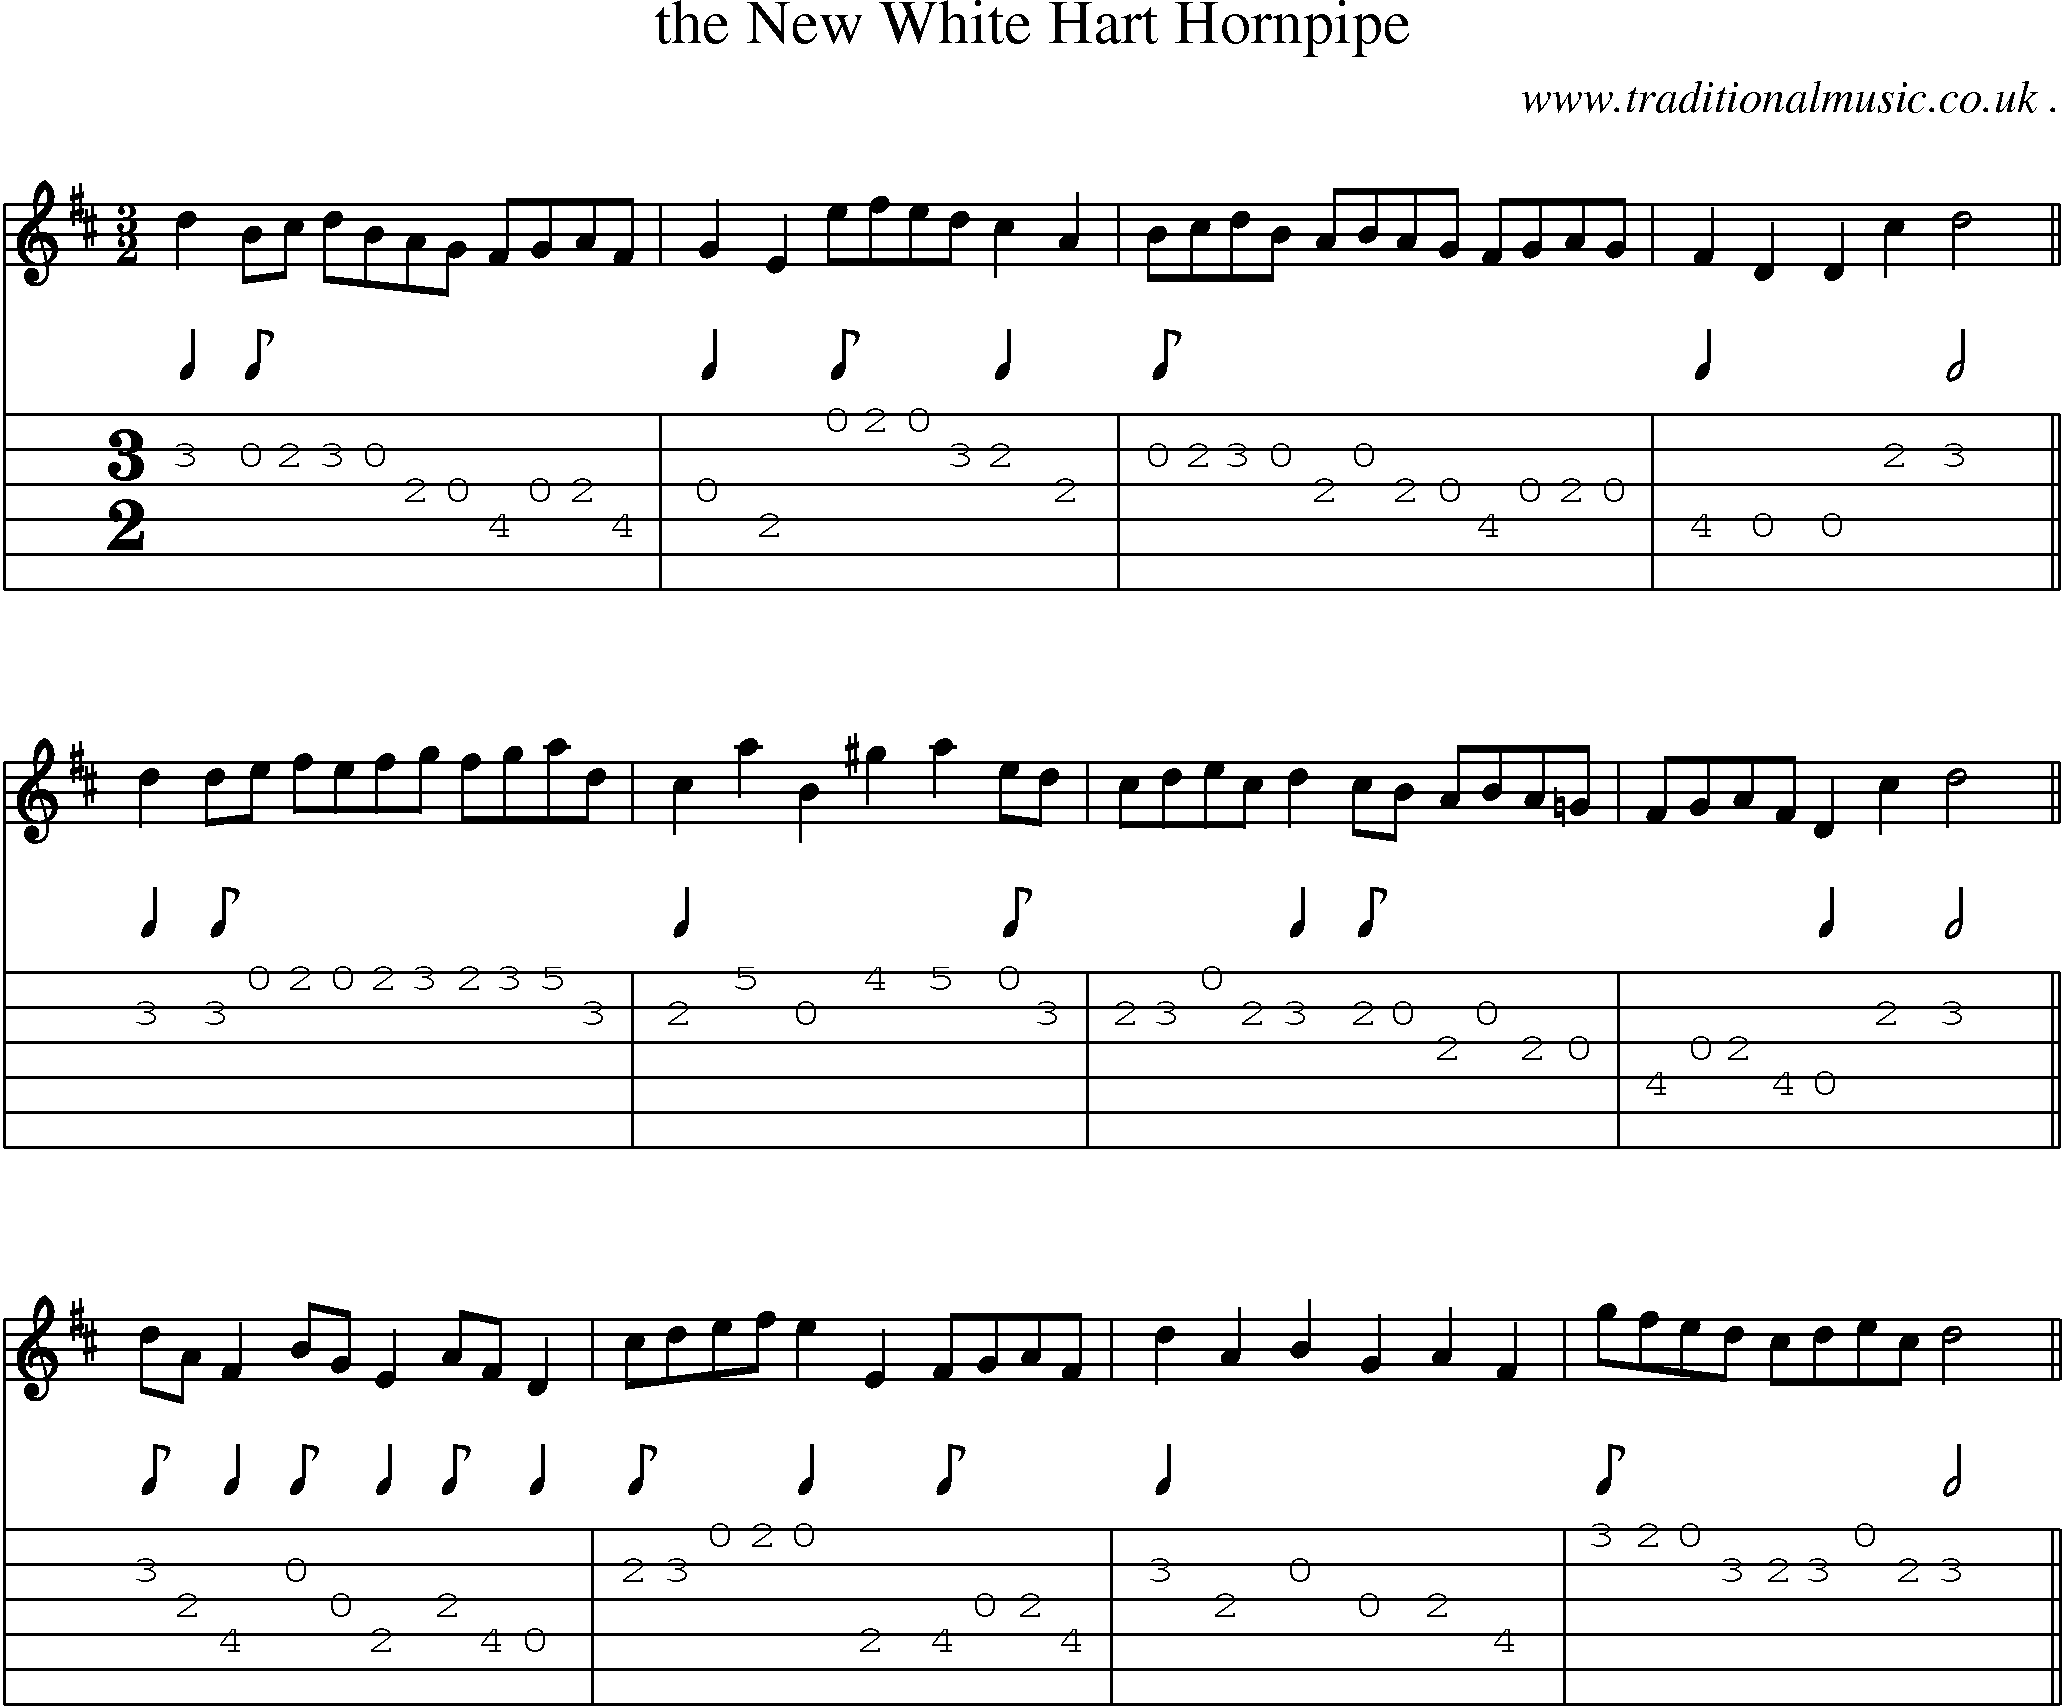 Sheet-Music and Guitar Tabs for The New White Hart Hornpipe